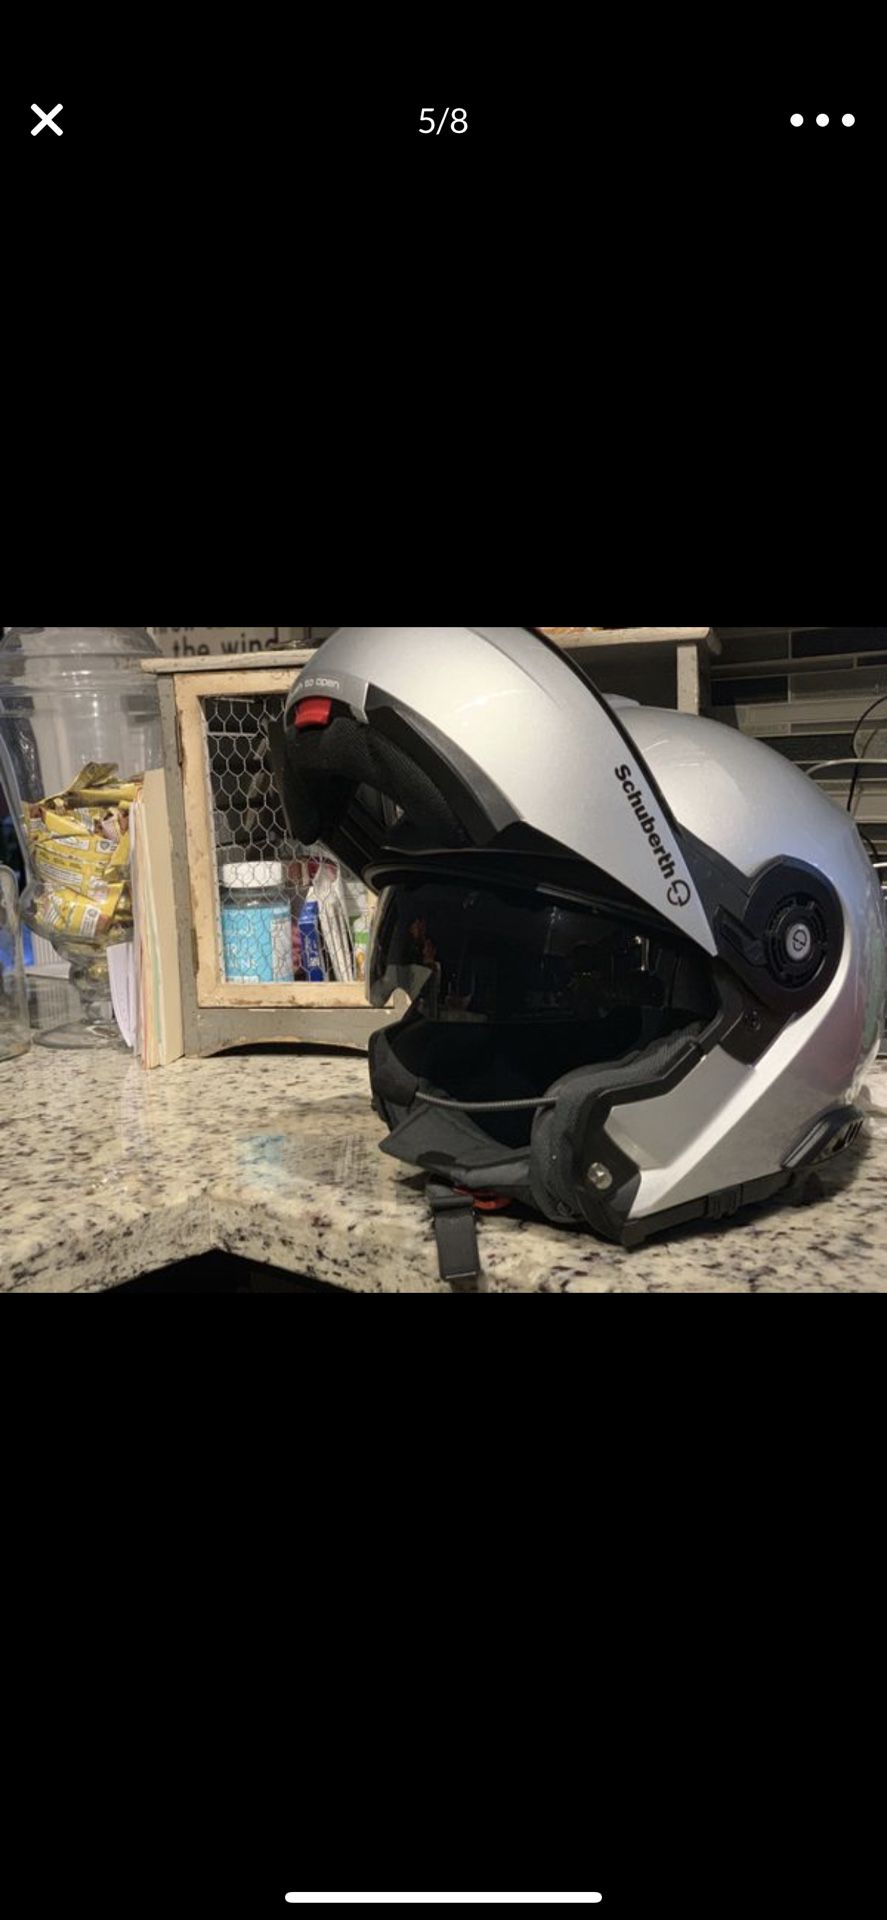 Bmw helmet motorcycle with communication system